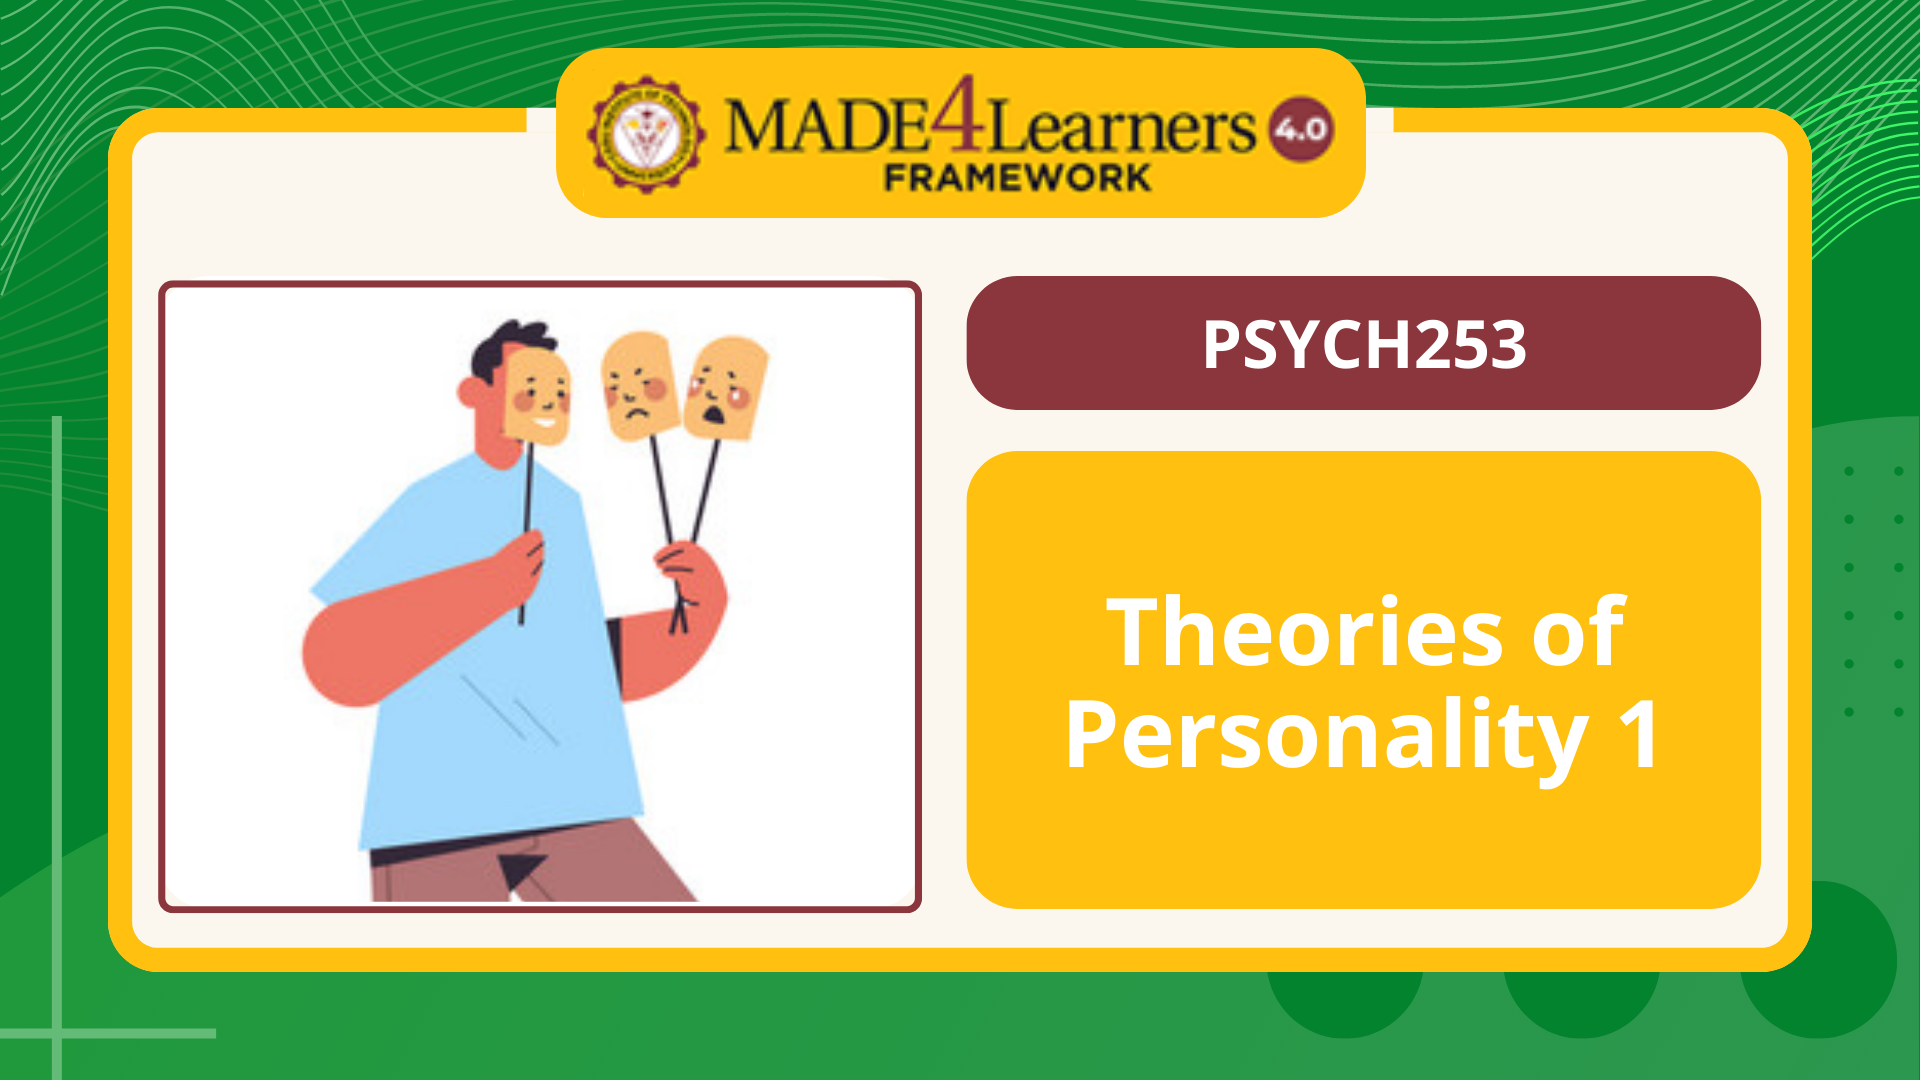 PSYCH253 Theories of Personality 1 (E1-C2 AP4)